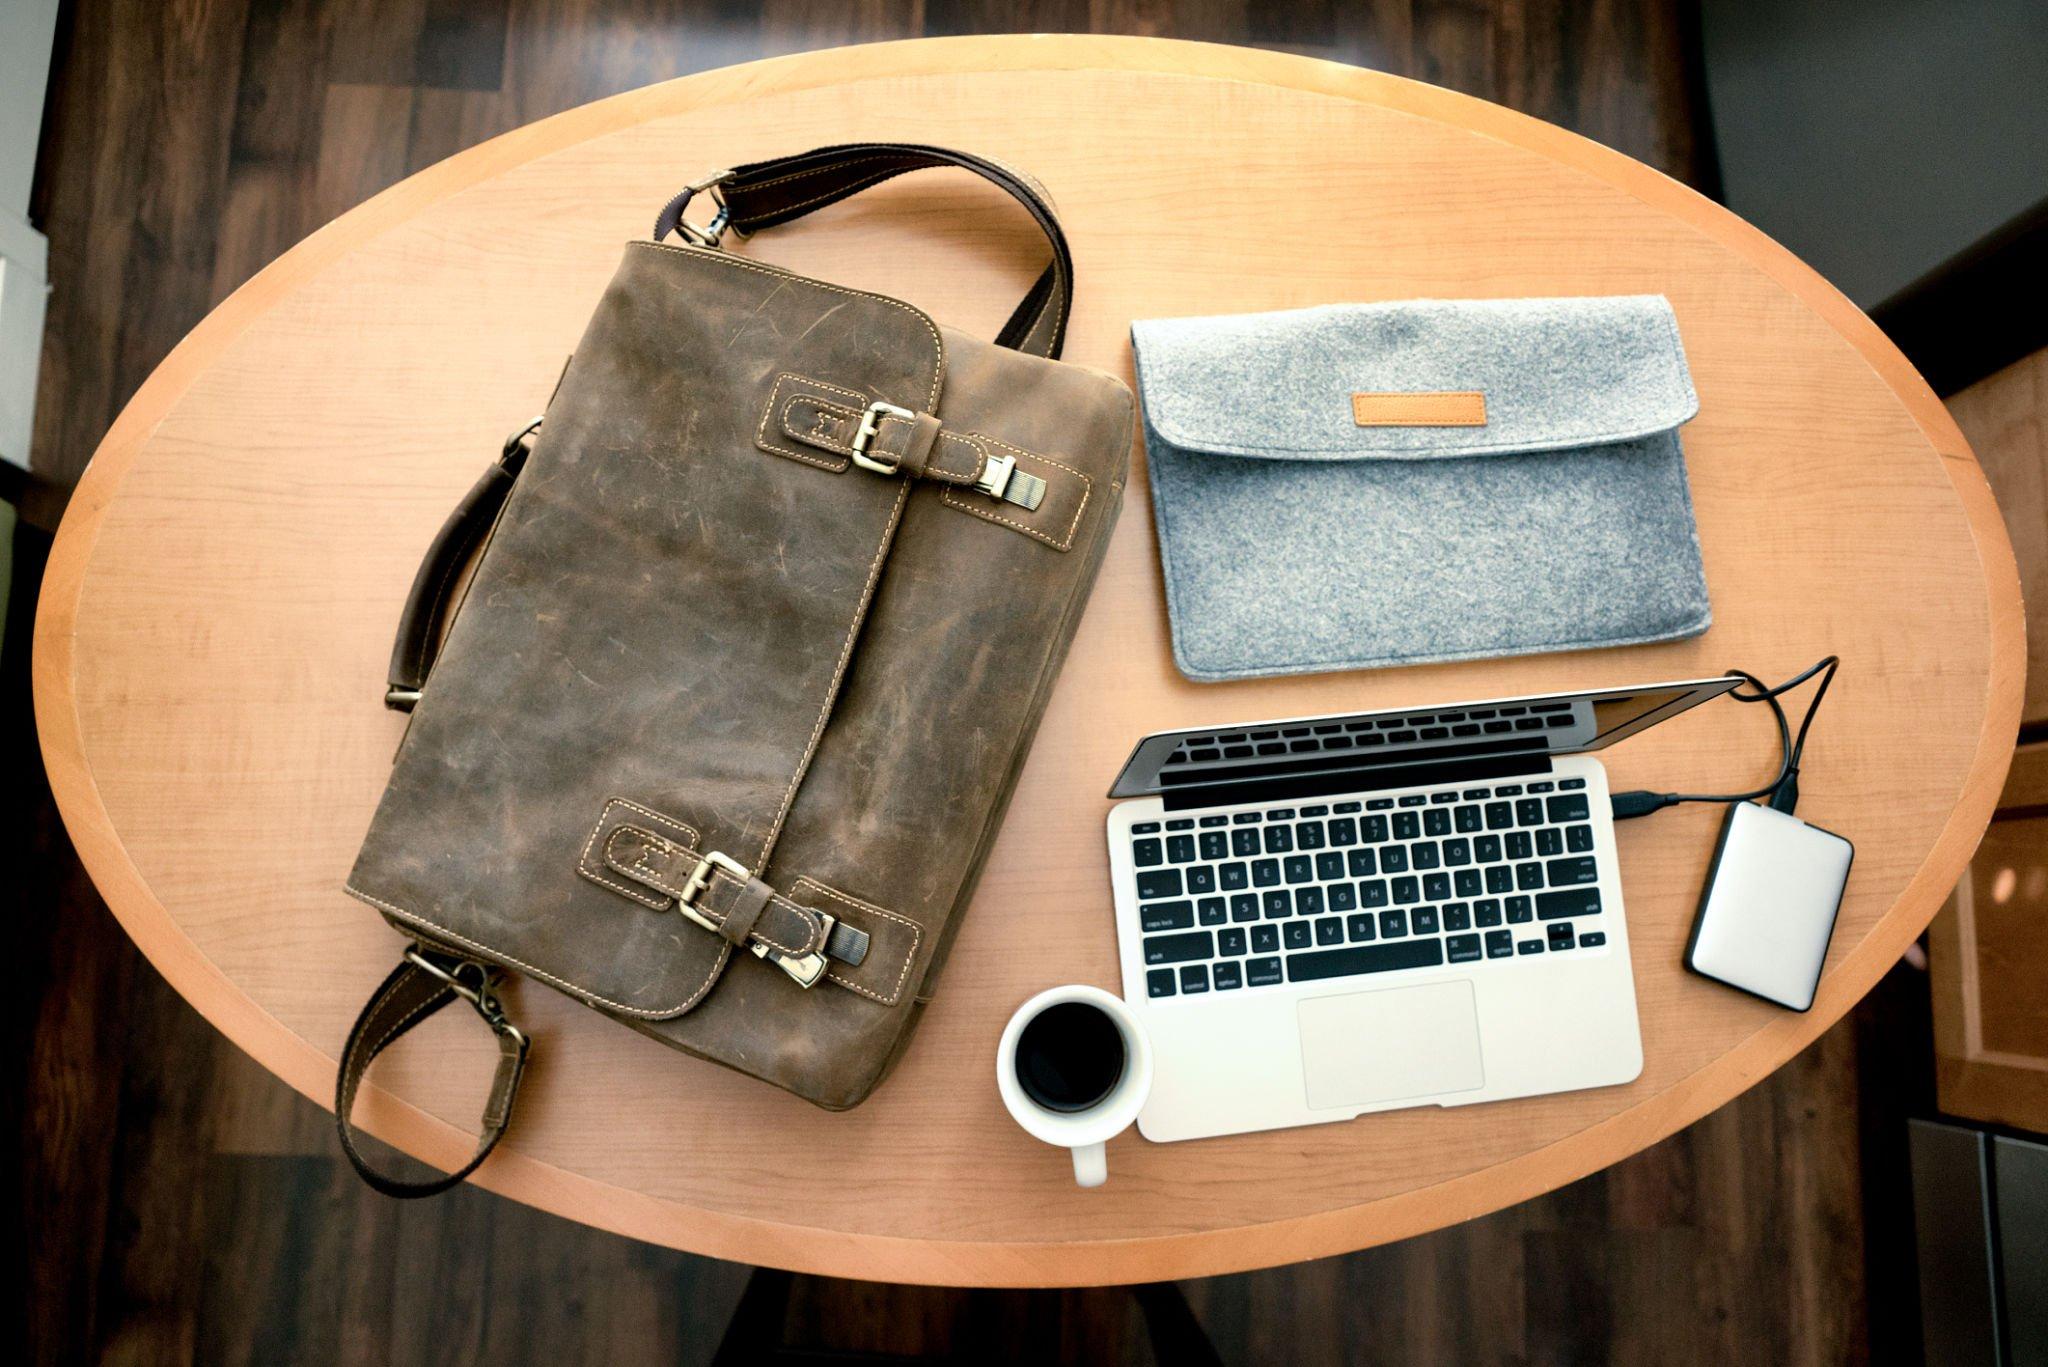 Buy a Stylish Laptop Bag for Your Laptop